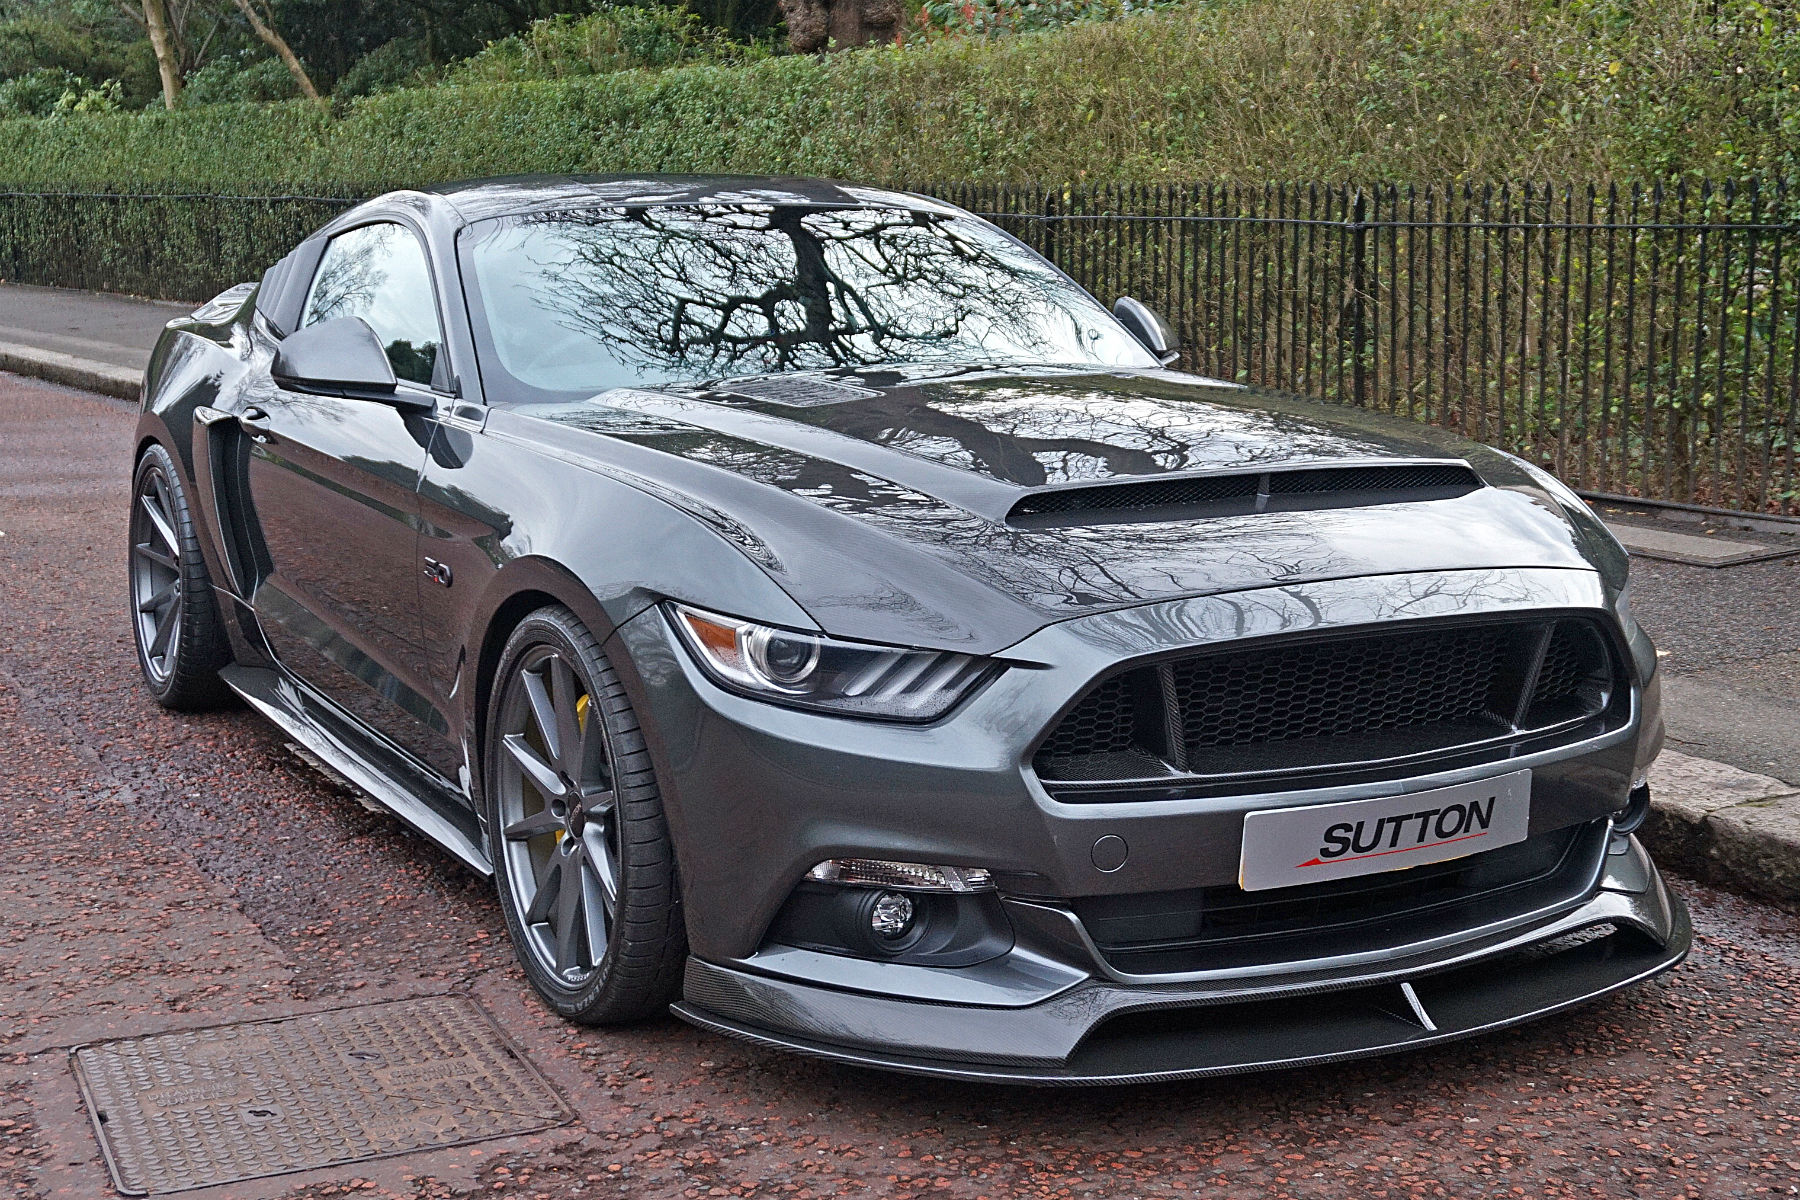 Ford Mustang Sutton CS800